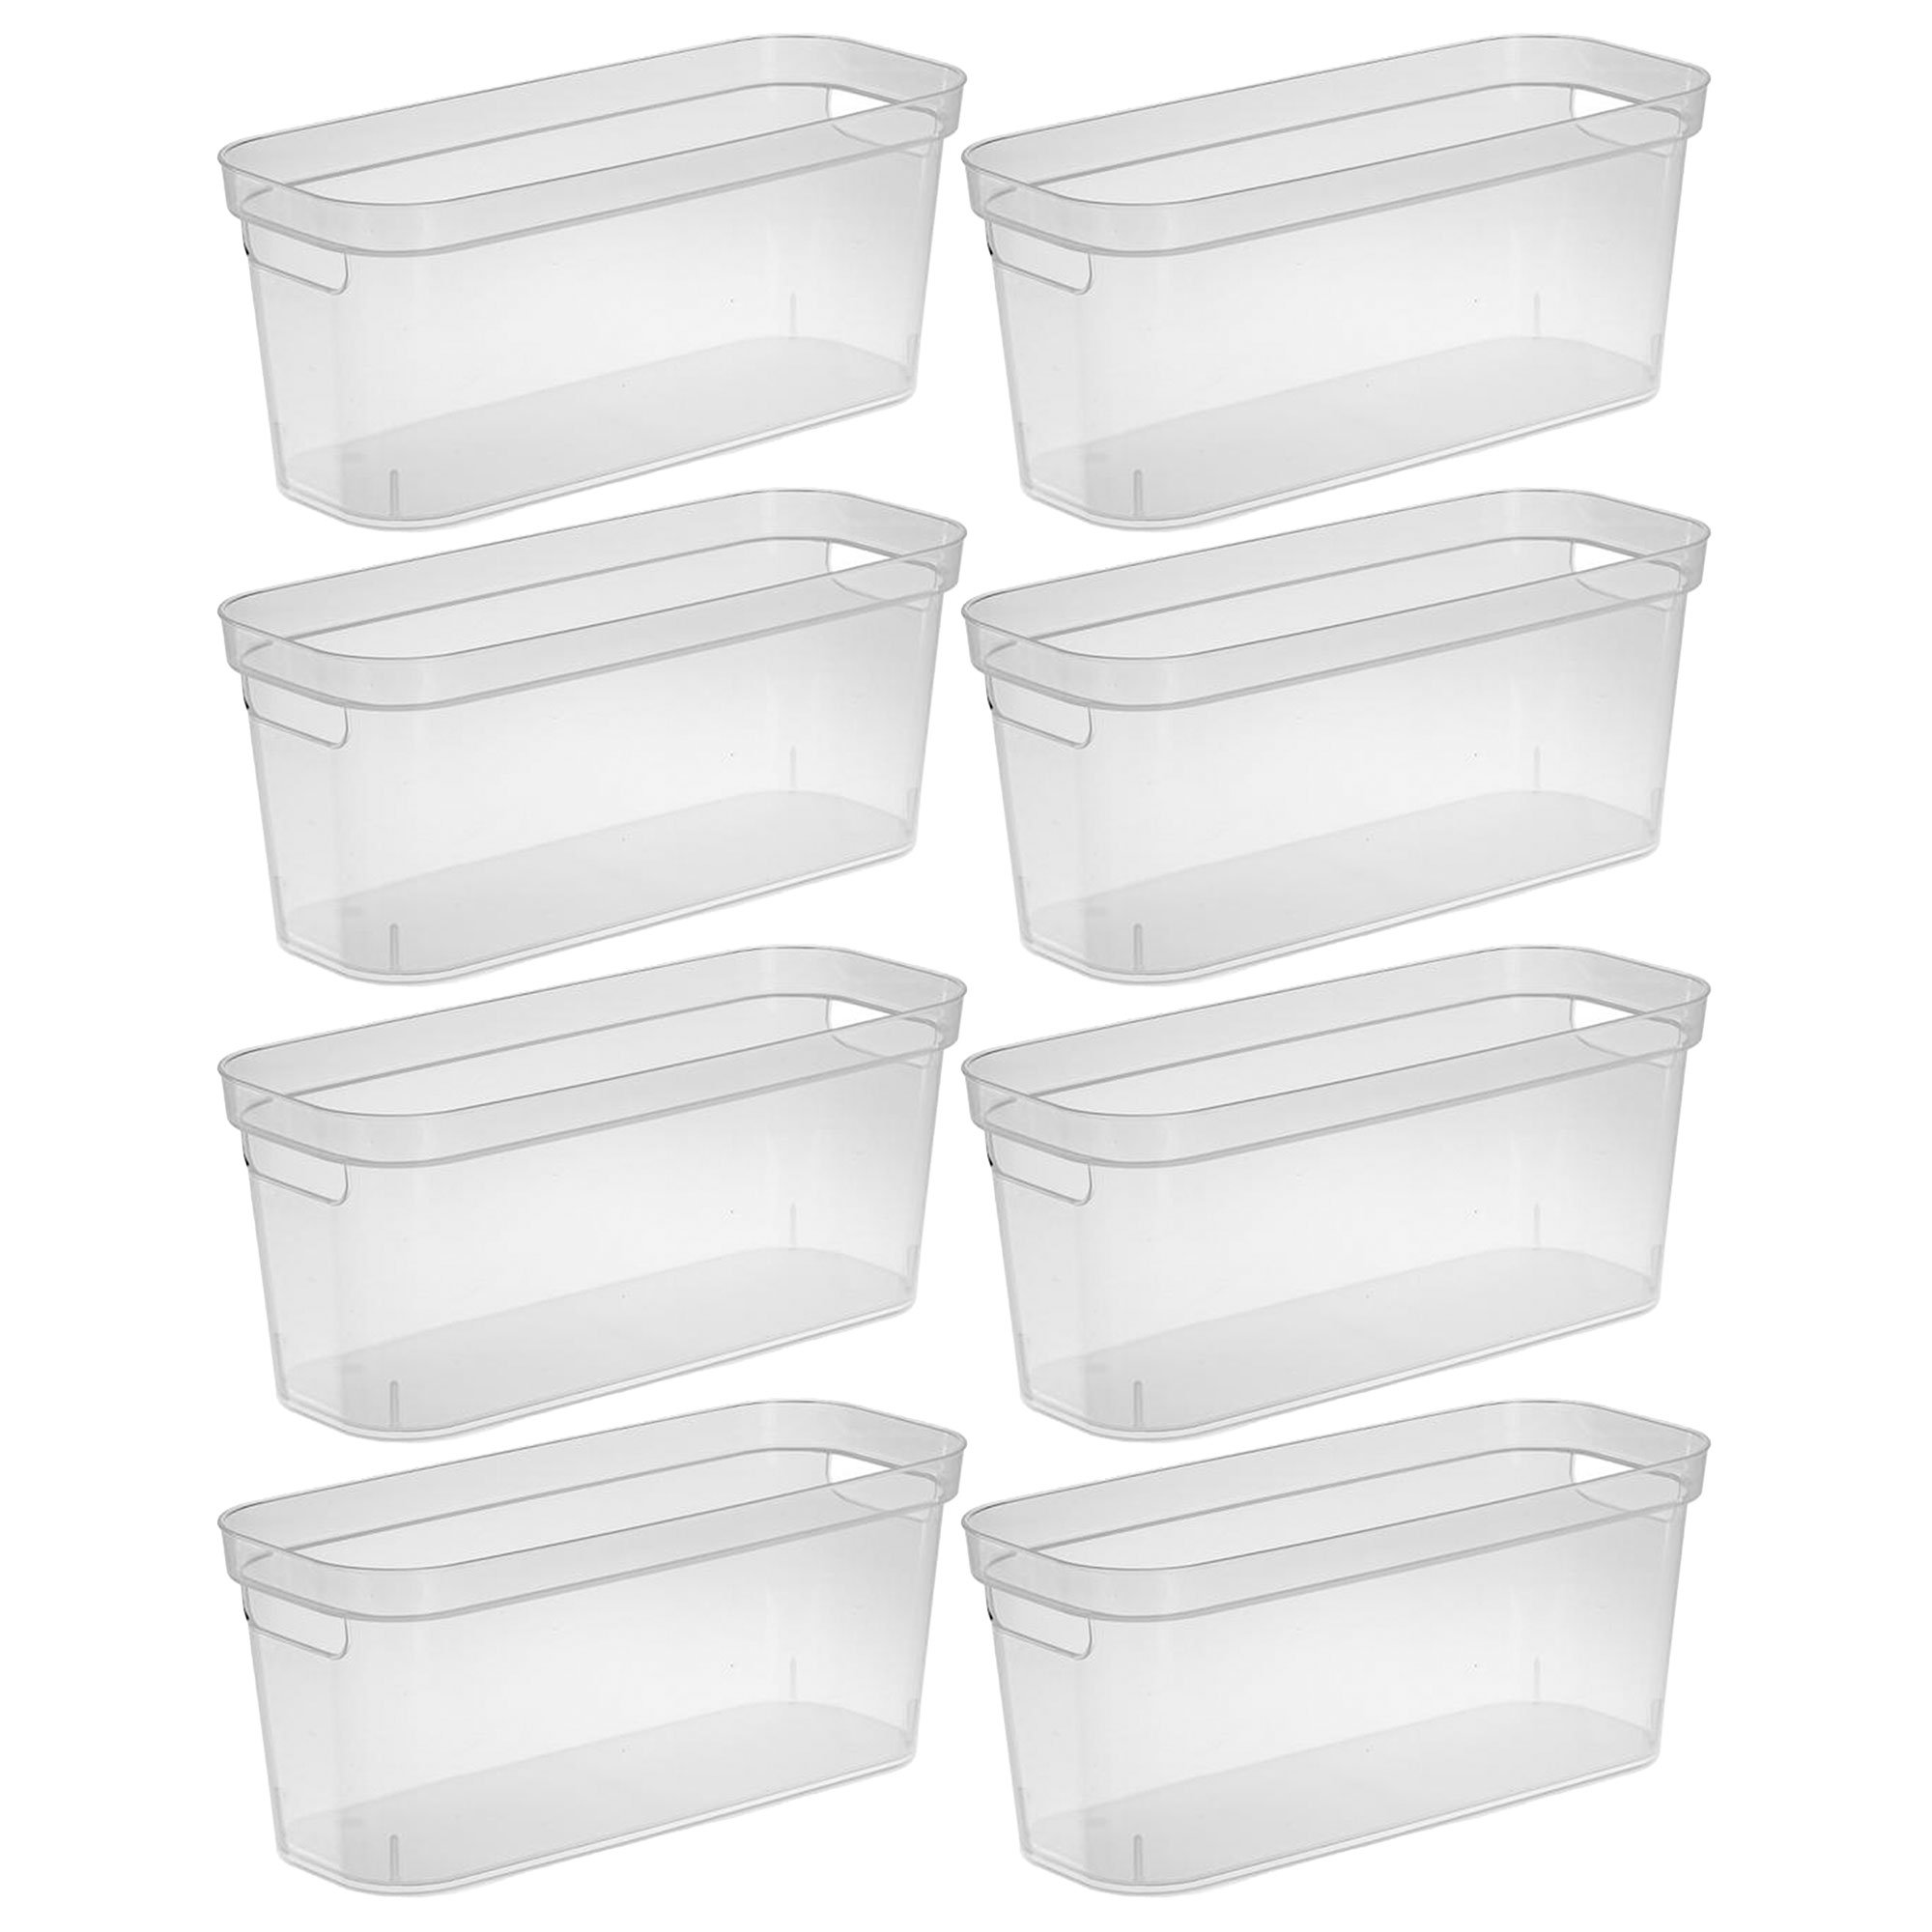 Reusable tackable Flat Skinny Stack Containers Food Preservation